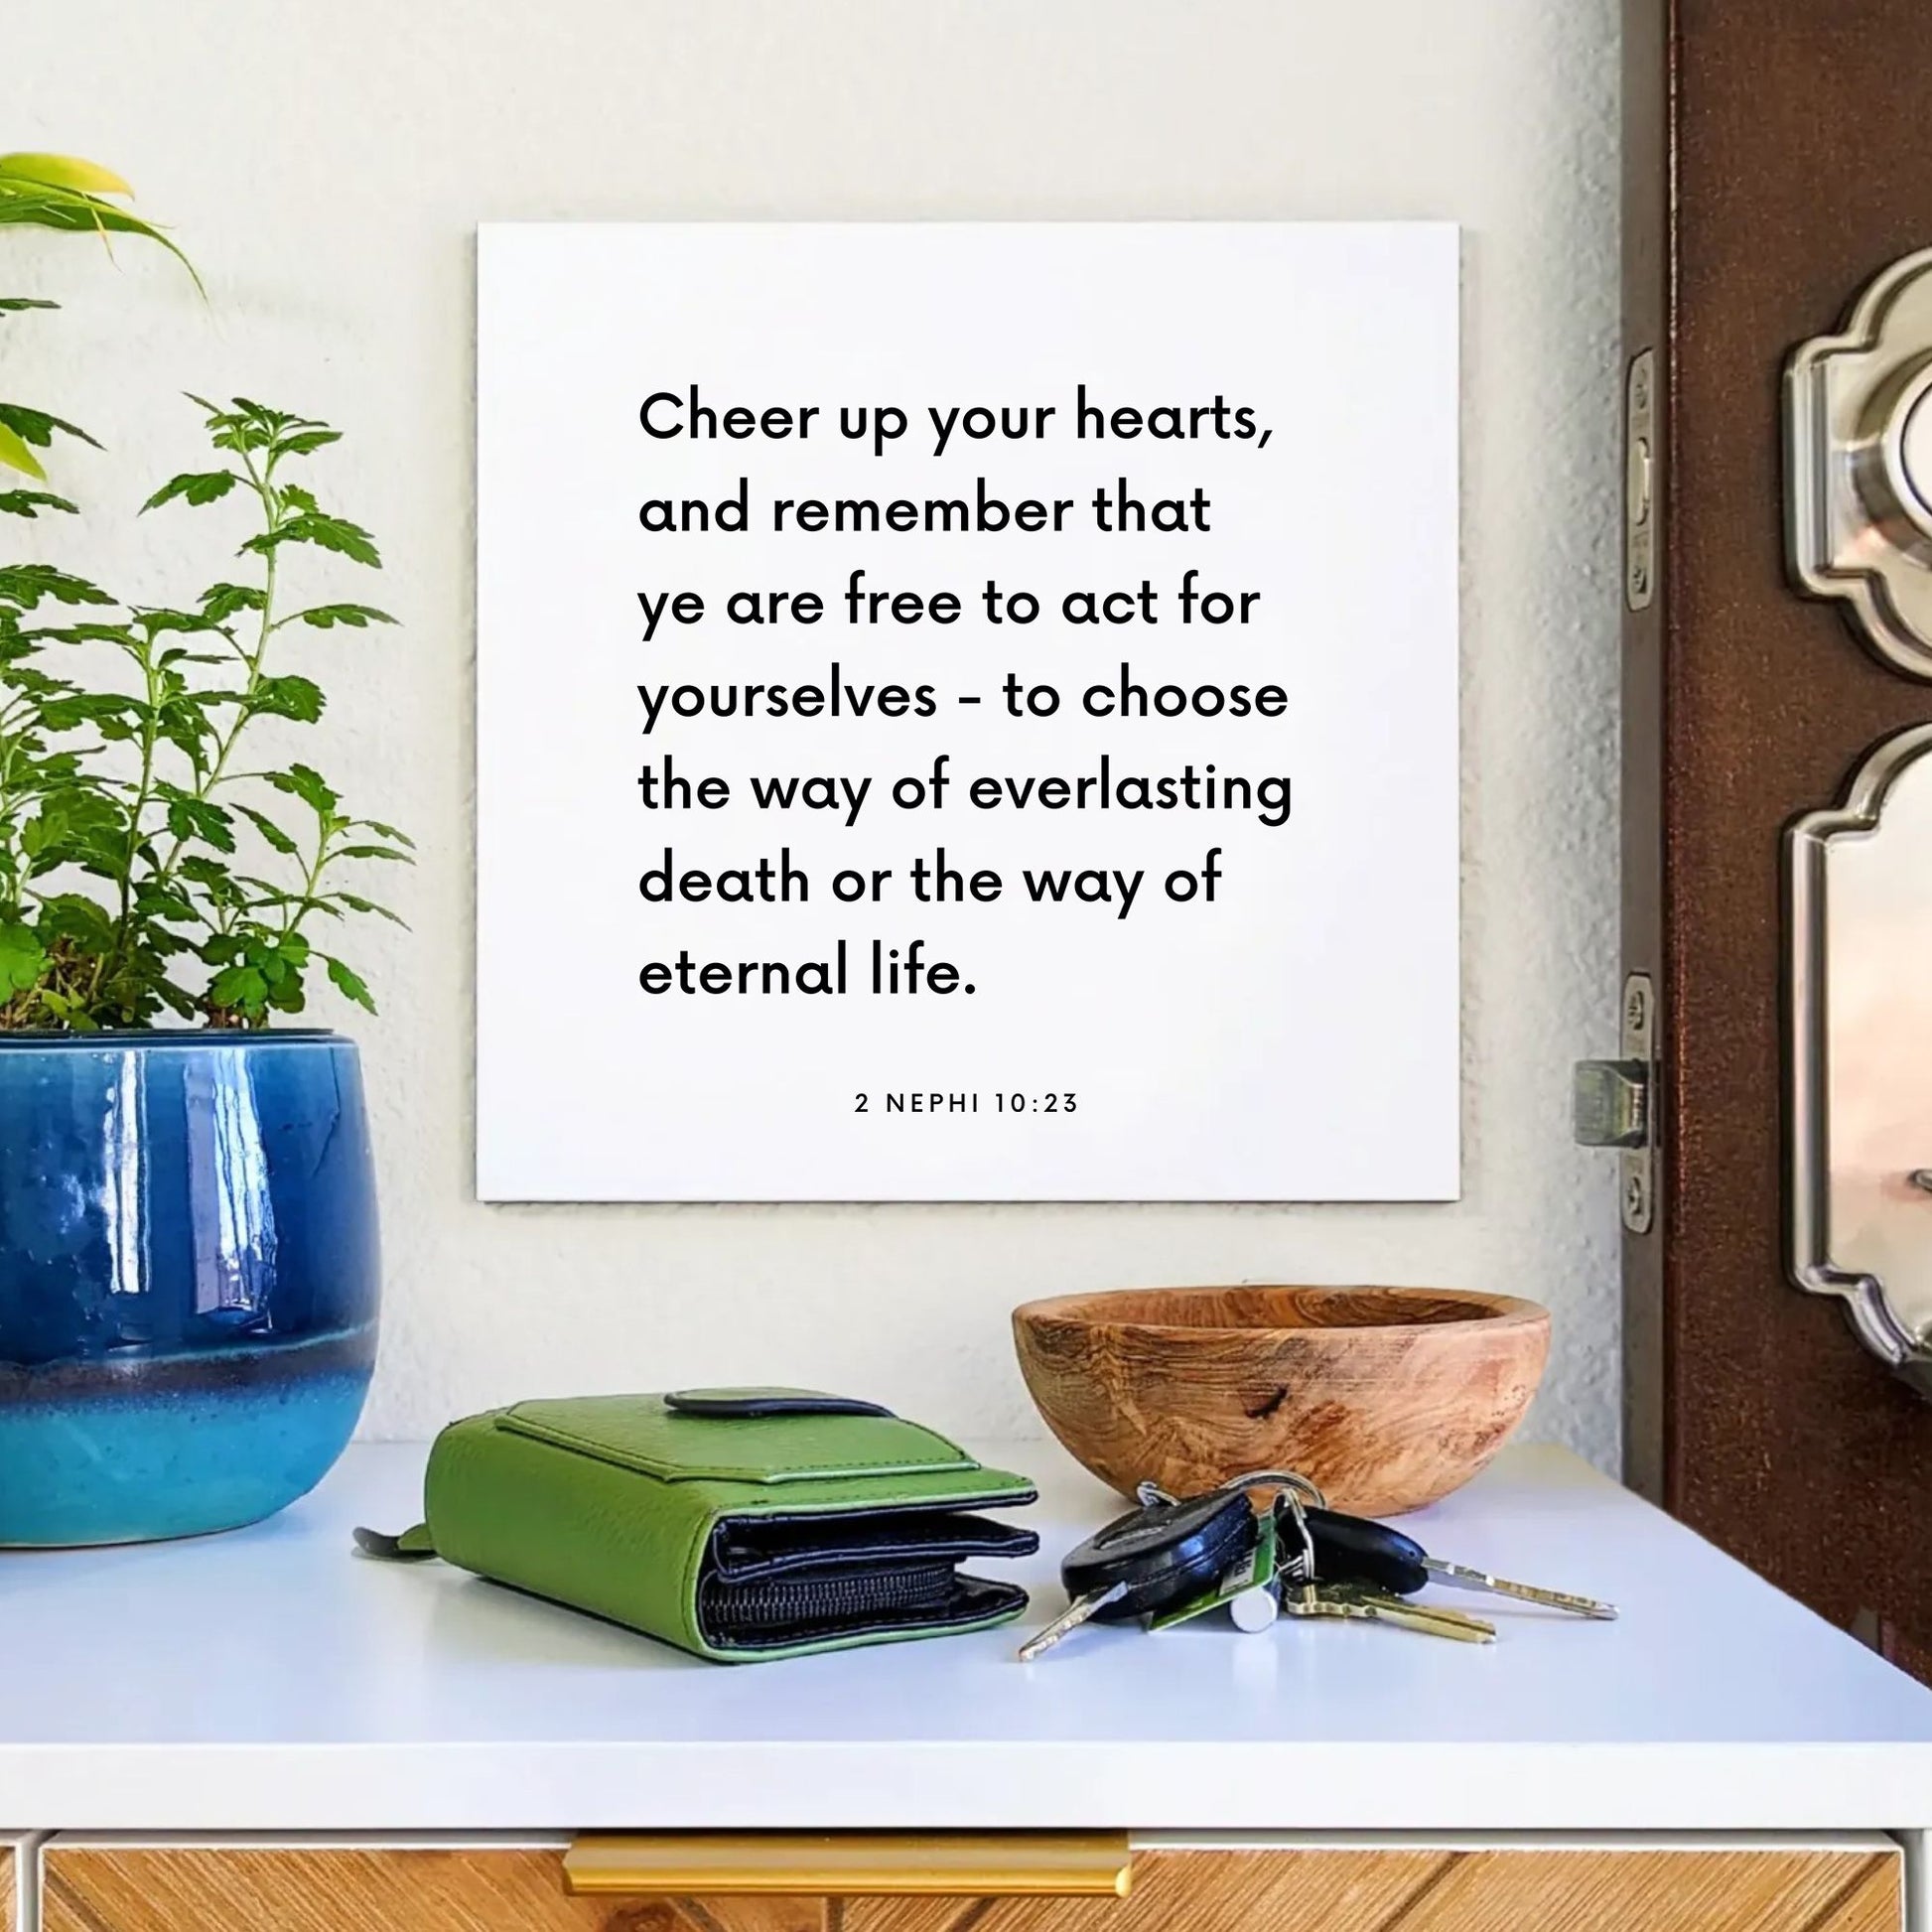 Entryway mouting of the scripture tile for 2 Nephi 10:23 - "Cheer up your hearts, and remember that ye are free"